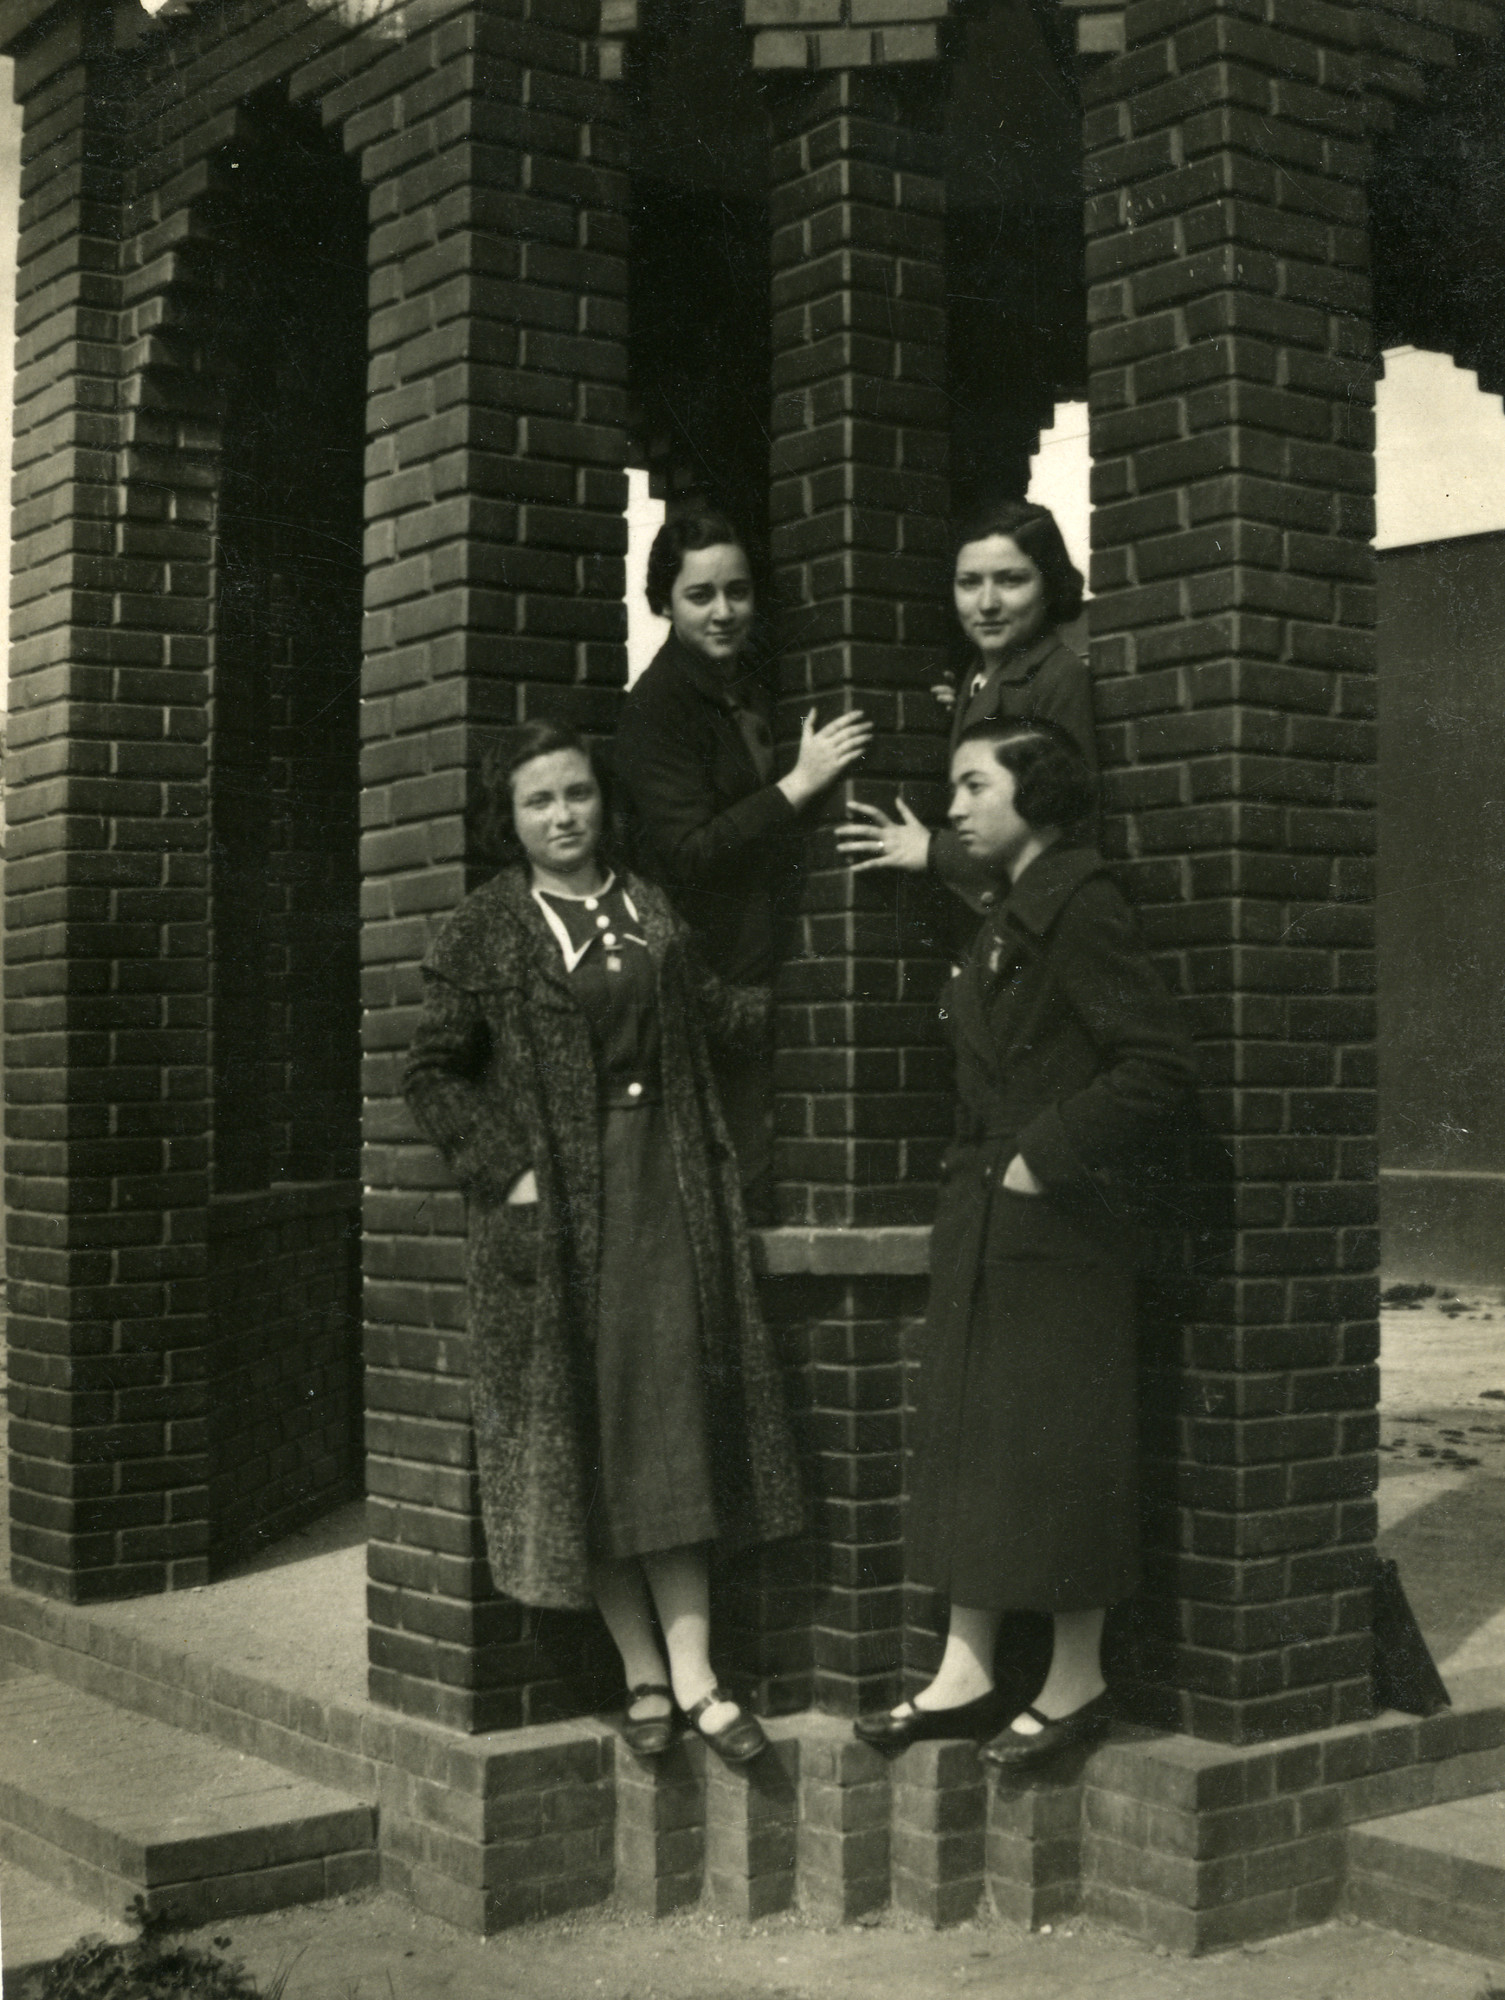 Four young women stand on the ledge of a brick structure under the bridge, in Salonika in 1940.

Jenny Noam (nee Ezratty) is standing in the front row on the left.